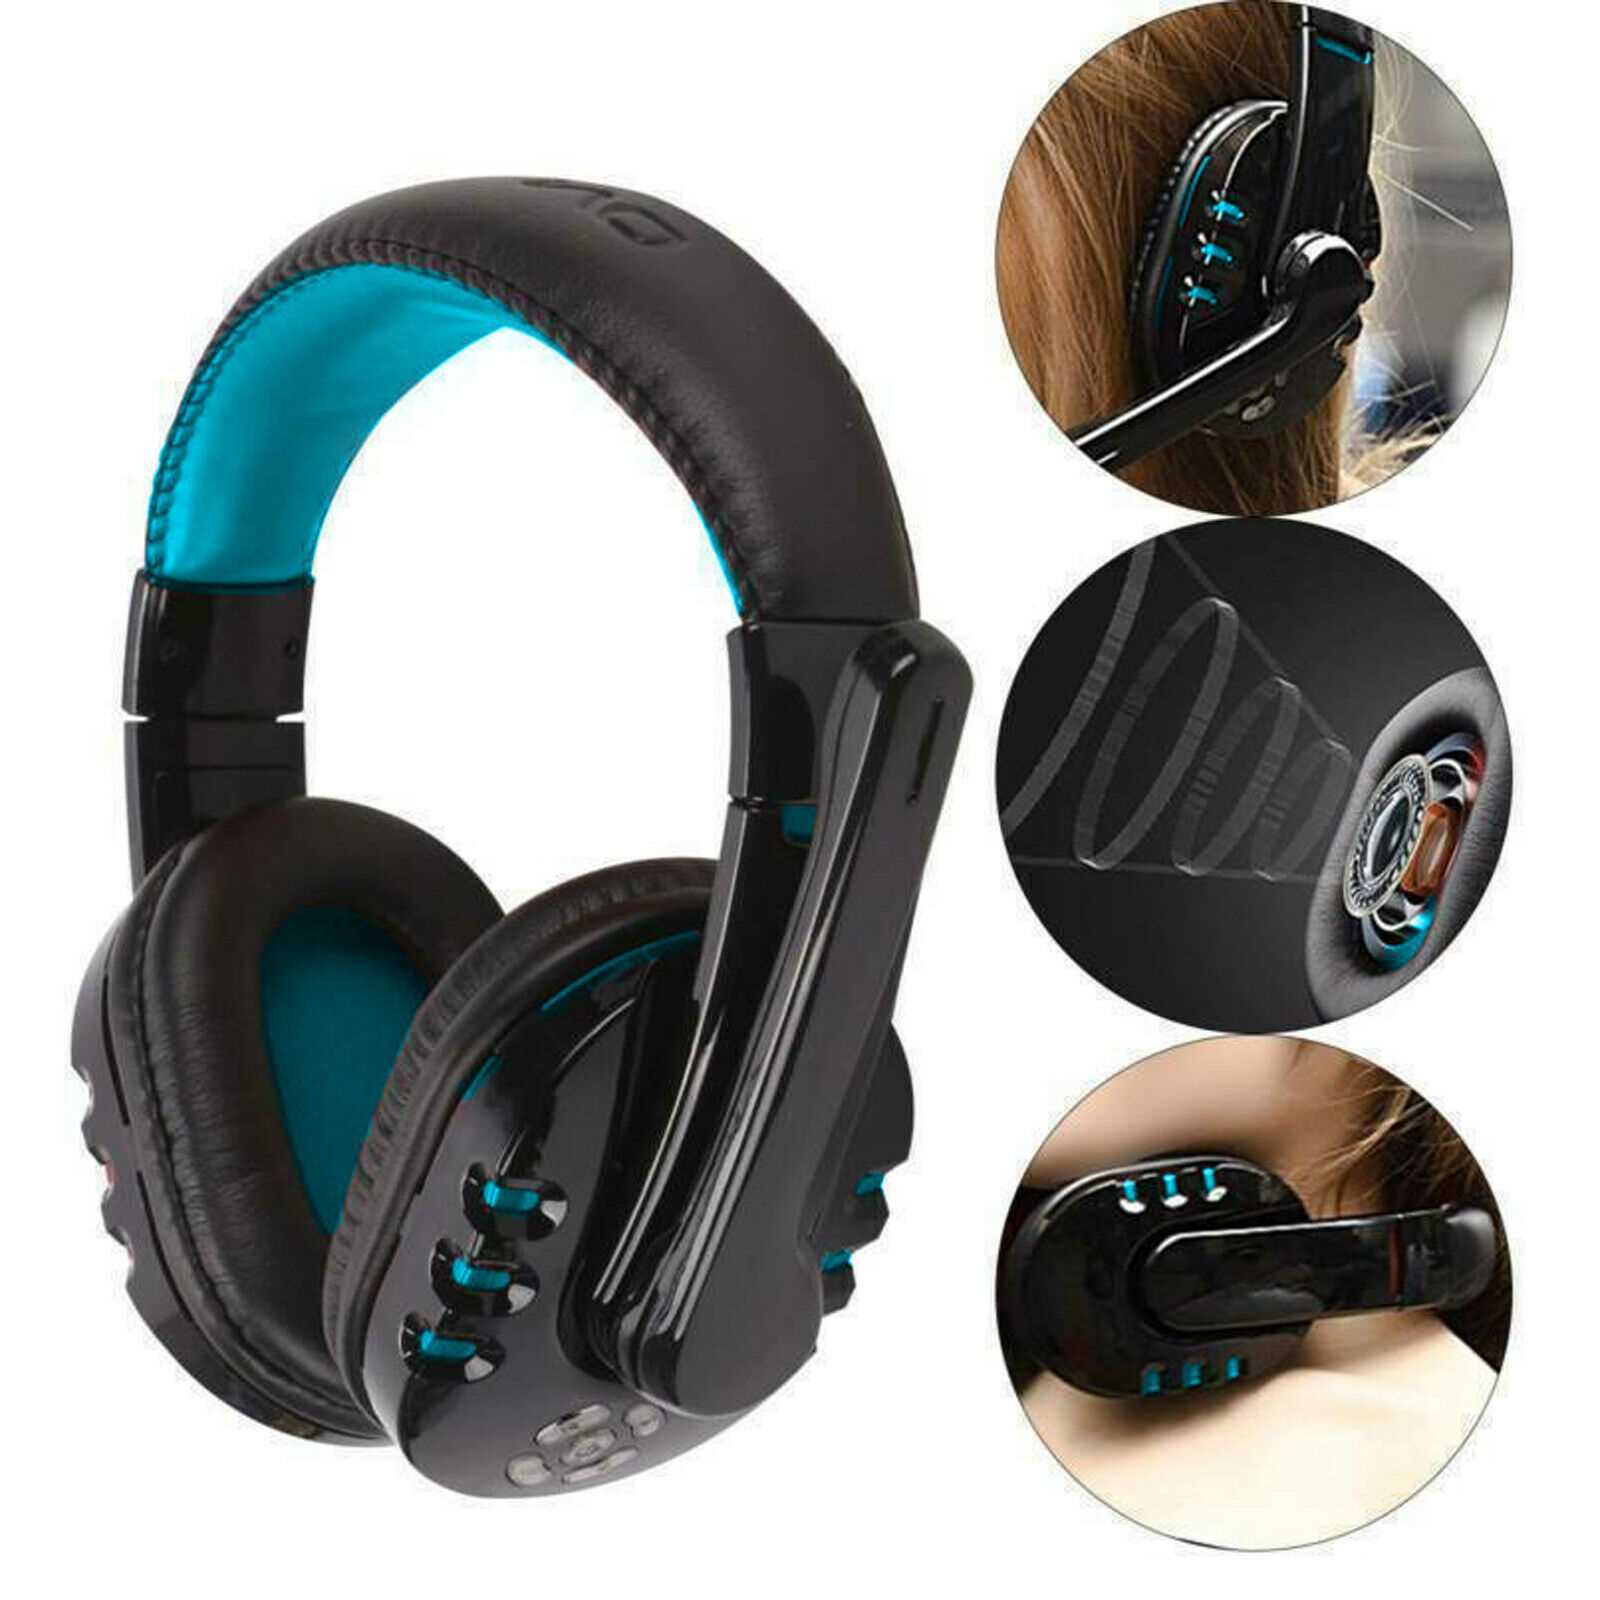 Gaming Headset 3.5mm Wired Headphone Stereo with Microphone For PS4 PC Xbox One